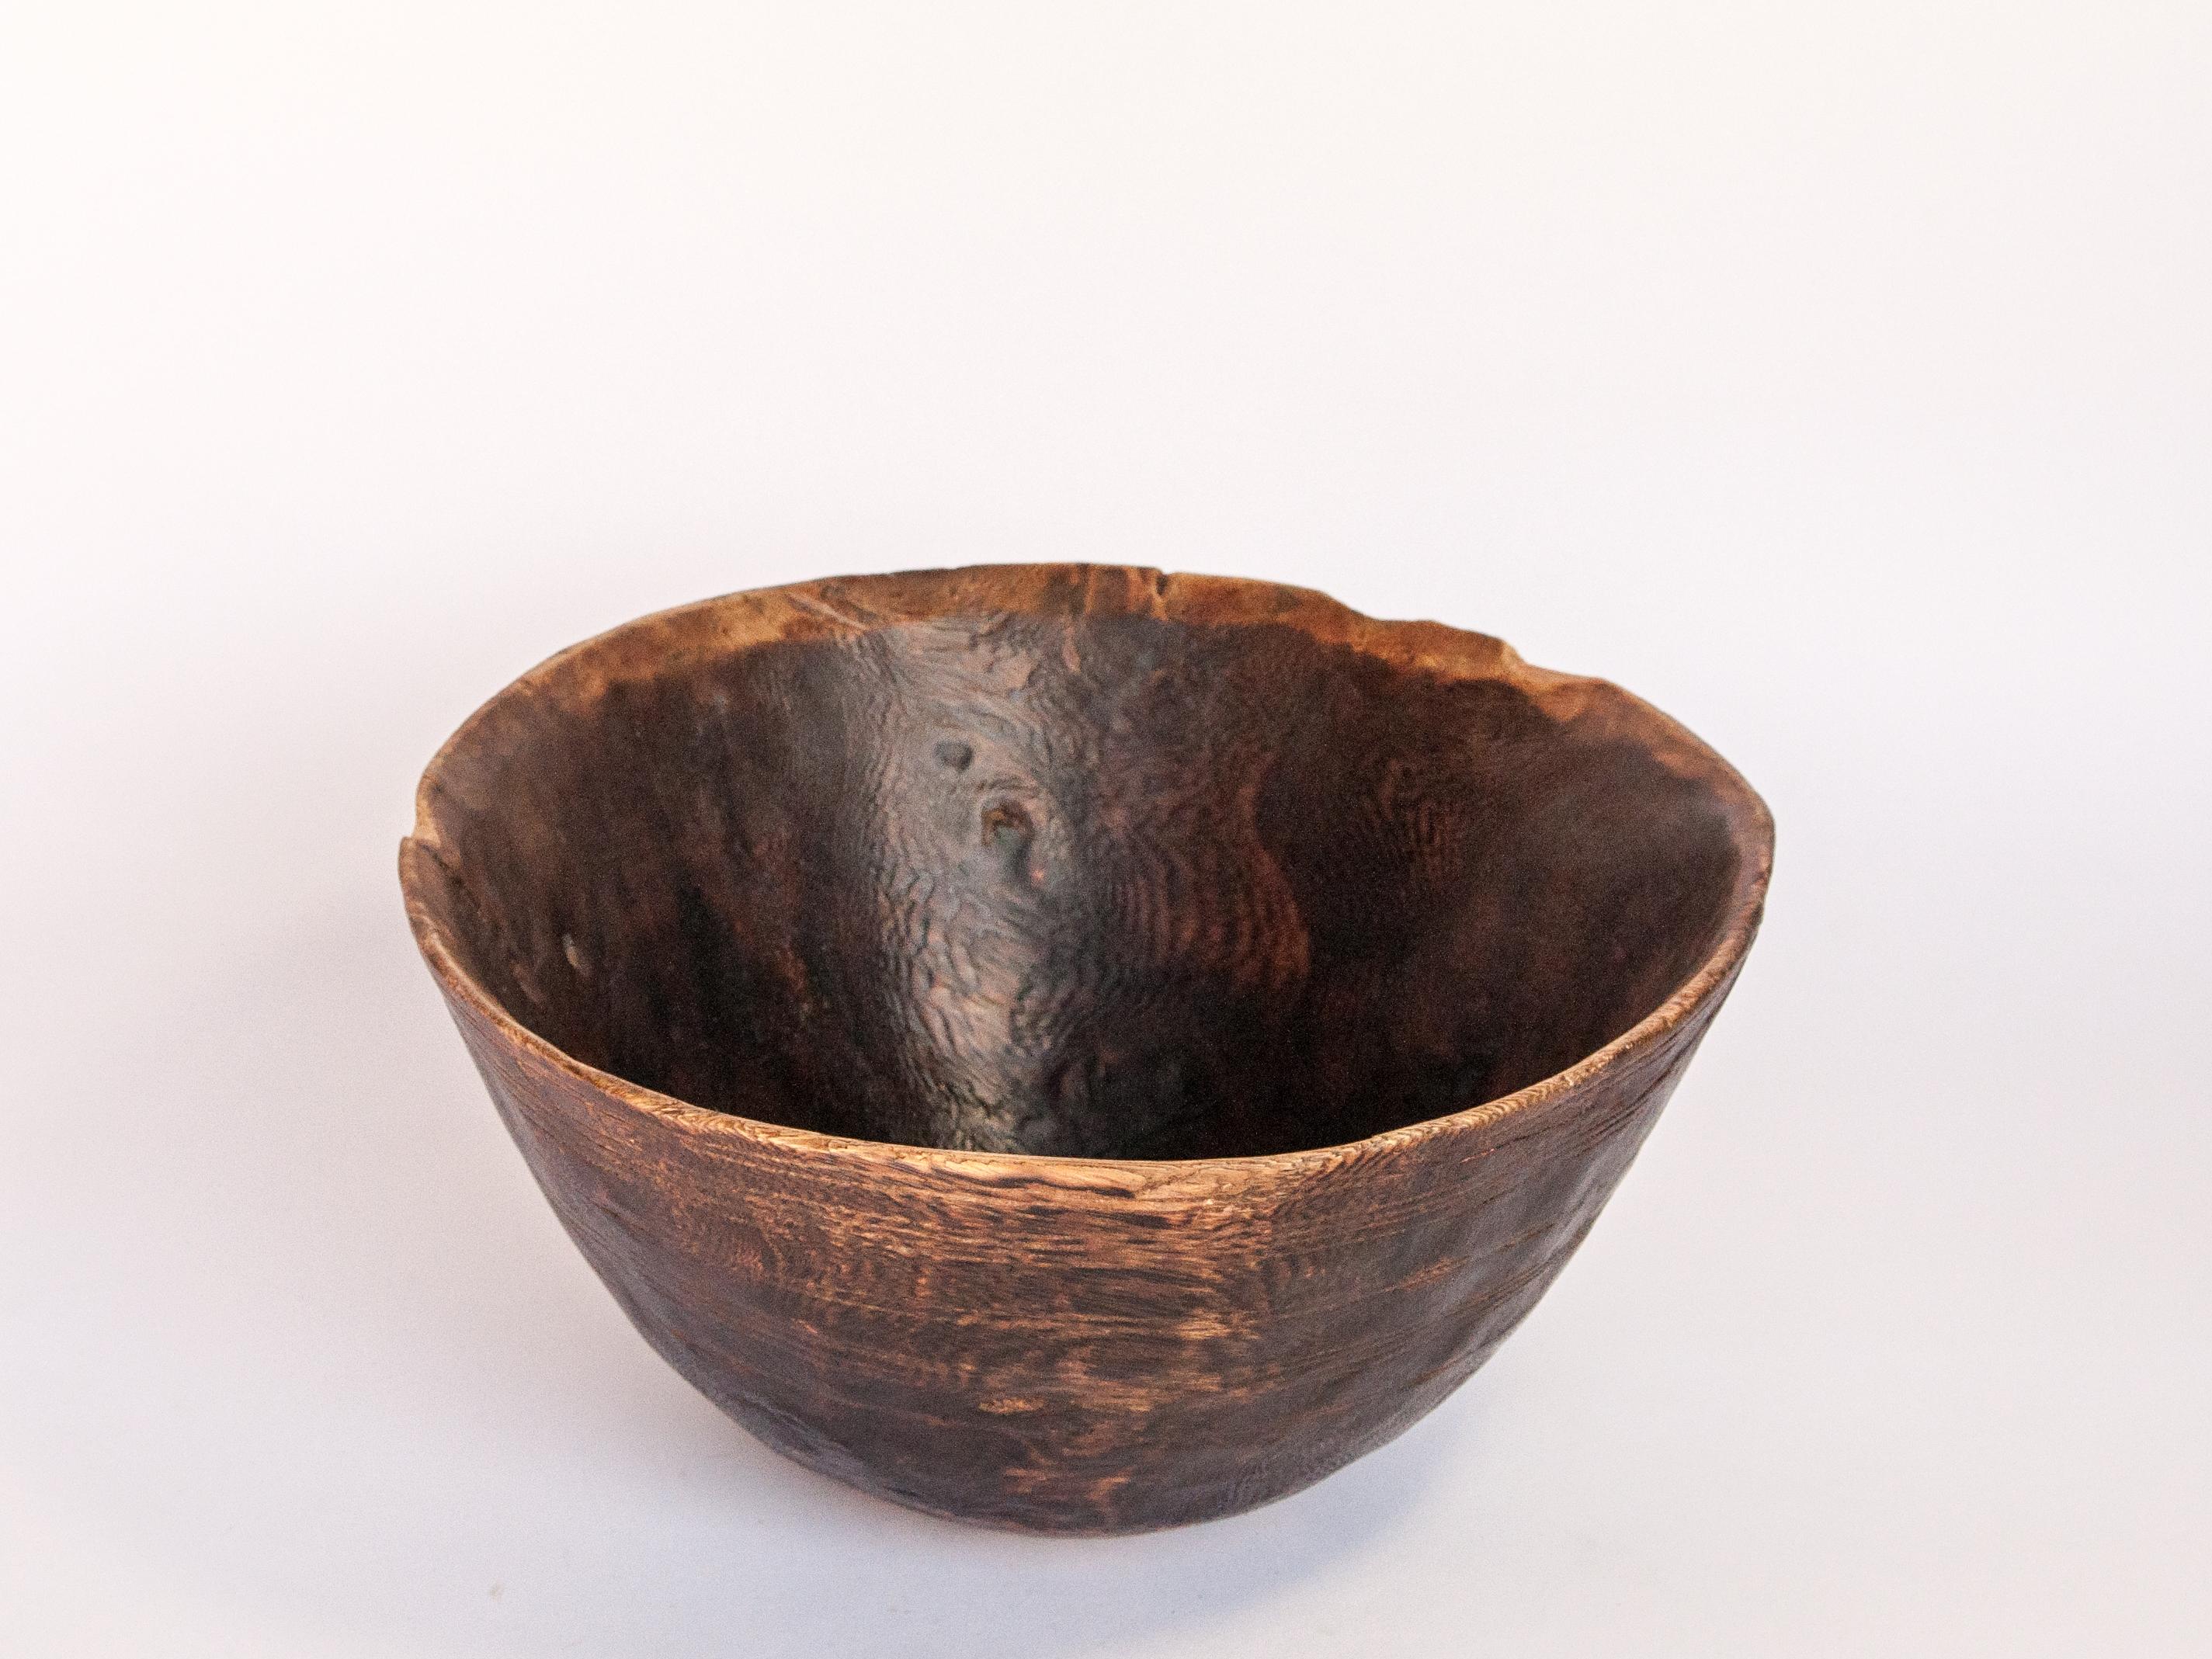 Tribal wooden bowl. Strongly figured wood. Tuareg. West Africa, mid-20th century
This striking wooden food or grain bowl comes from the Tuareg, a nomadic people of the West African Sahel. It was fashioned by hand using very basic tools and